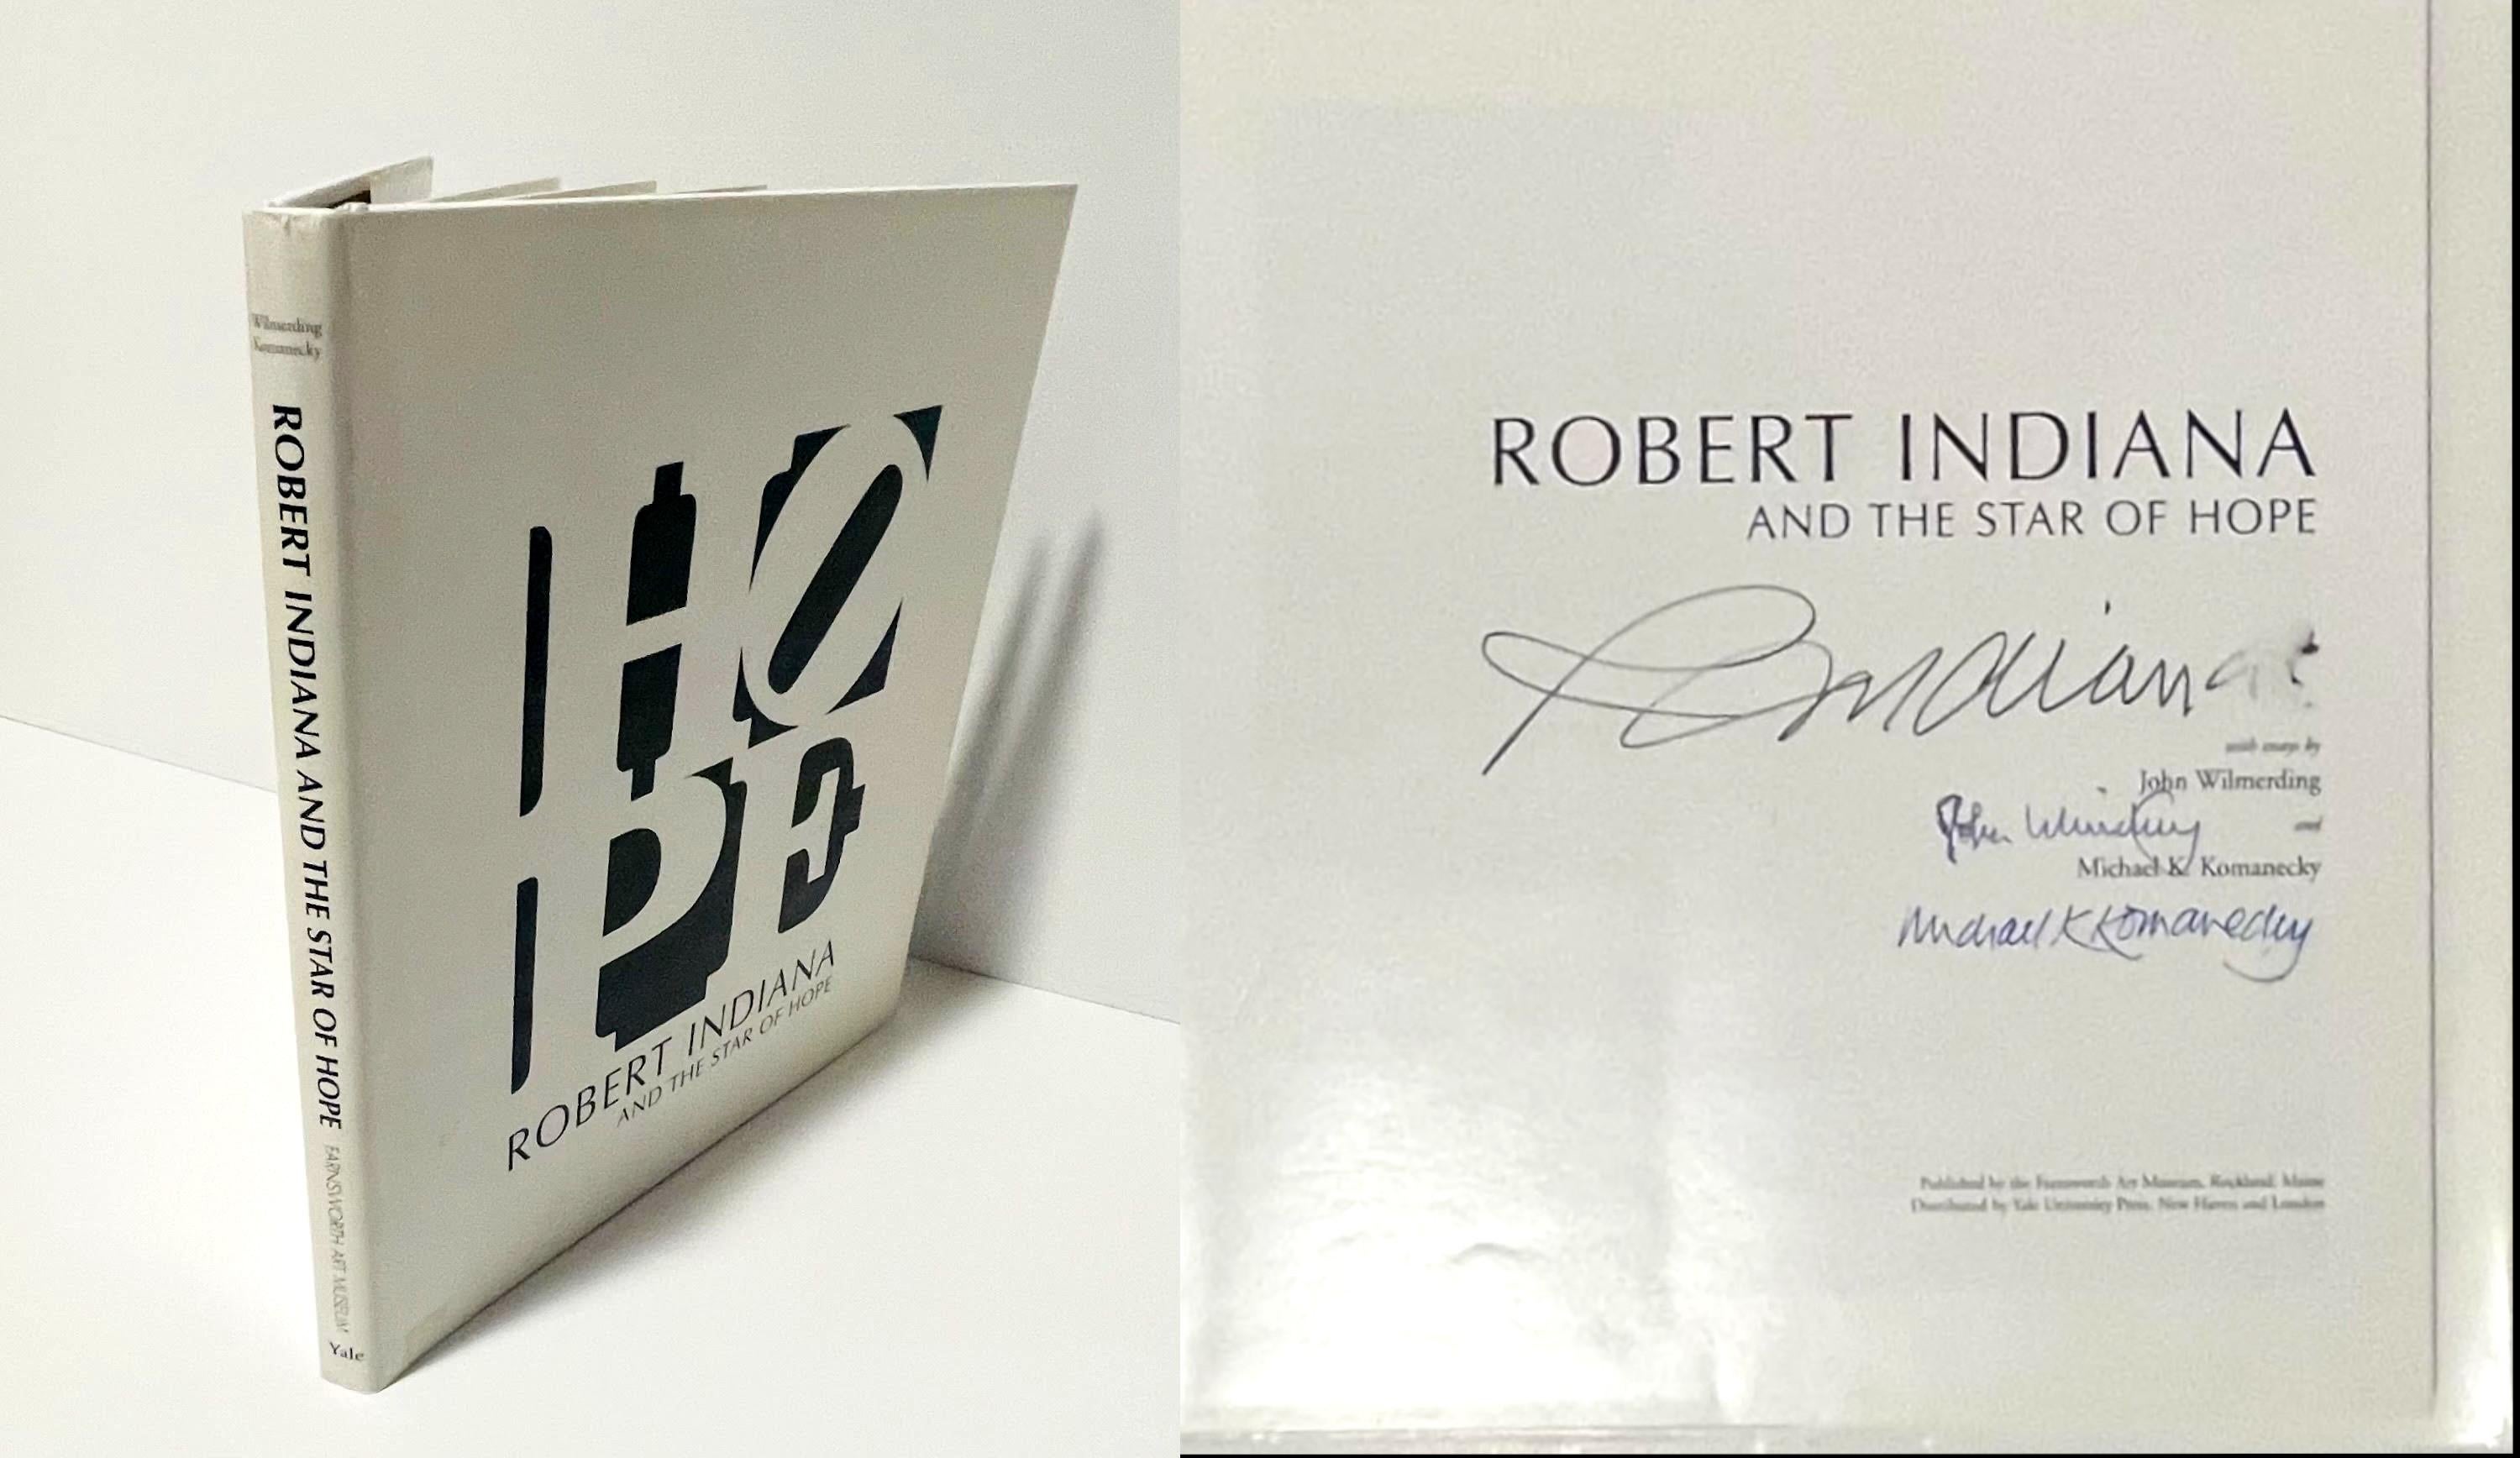 Robert Indiana
Monograph: Robert Indiana and the Star of Hope (hand signed by the artist as well as both writers), 2009
Hardback monograph with dust jacket (hand signed by Robert Indiana, as well as authors John Wilmerding and Michael K.